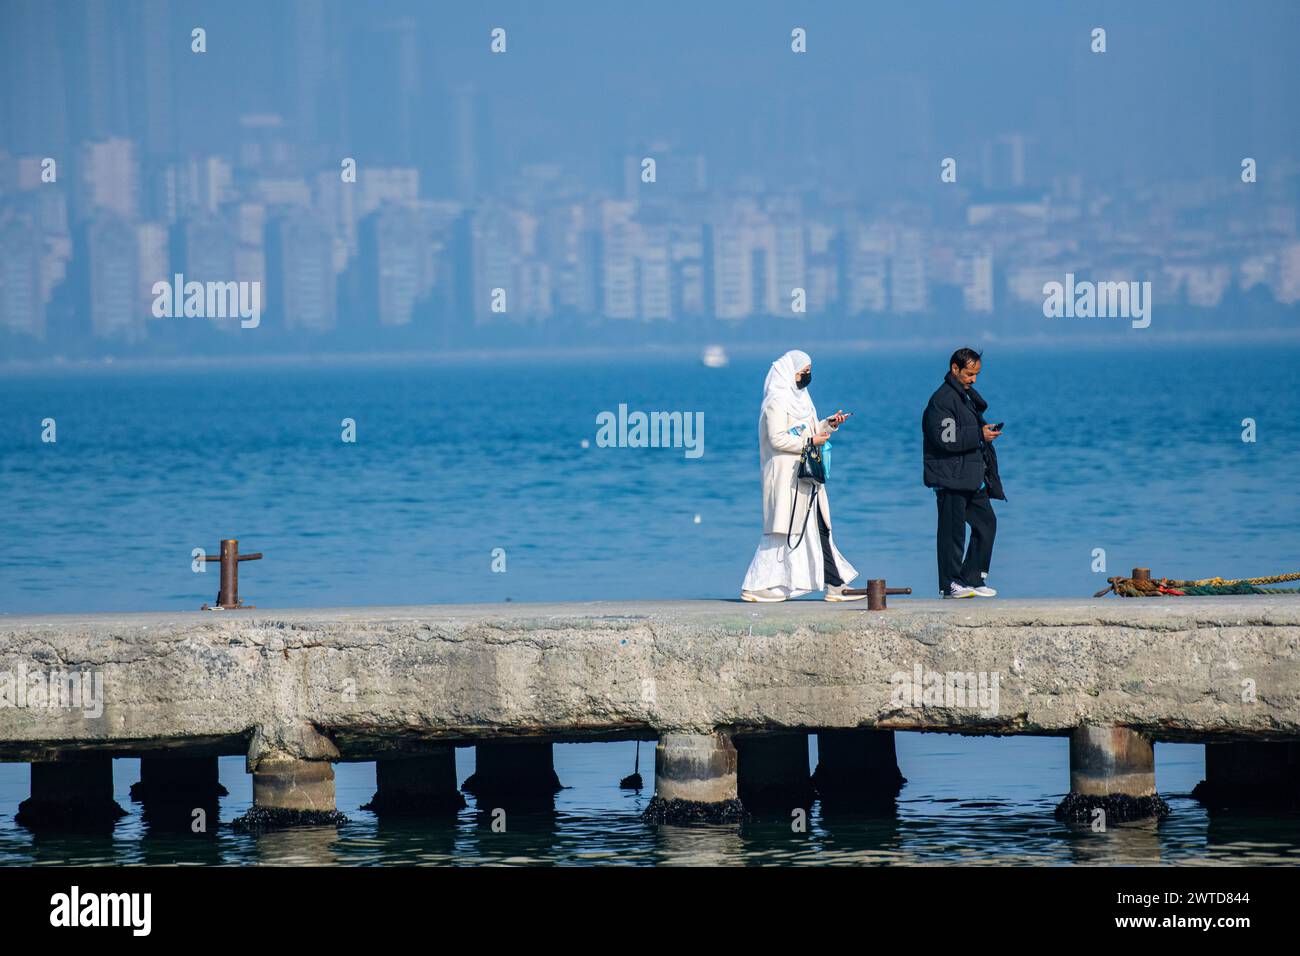 A lady and a man walk along a jetty with a backdrop of the skyscrapers and office buildings of modern Istanbul, Turkey, in the distance. Stock Photo